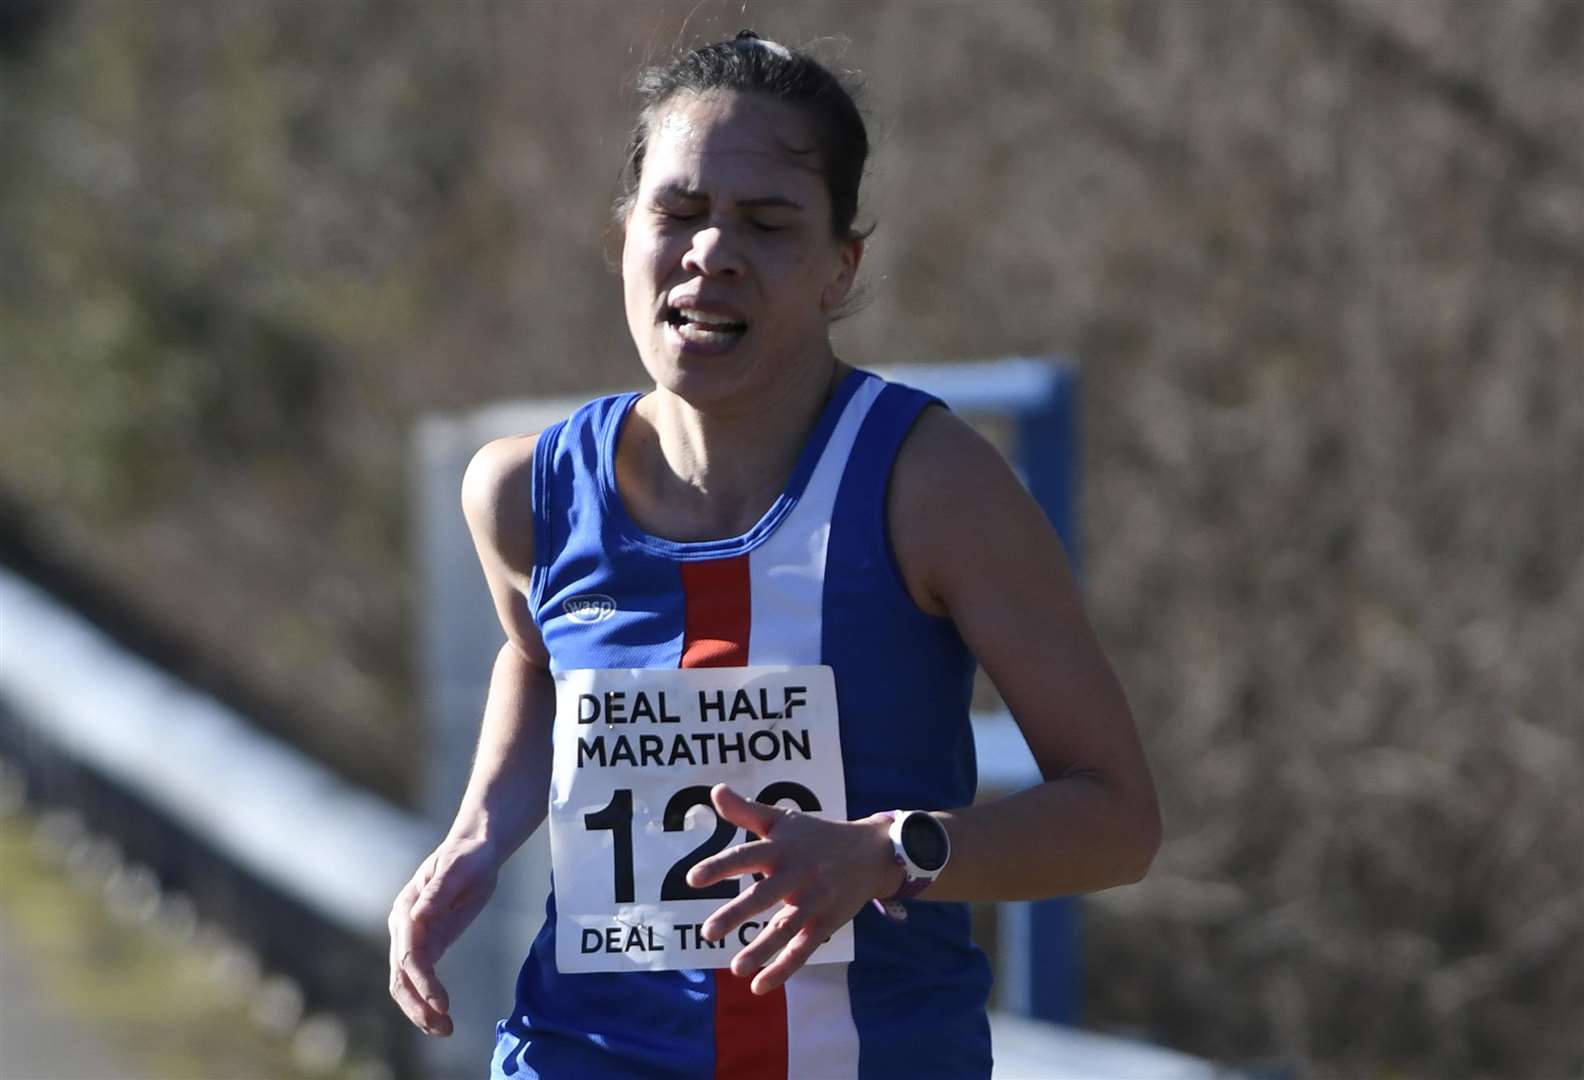 Nikki Goodwin was the first woman over the line in the Deal Half Marathon last year